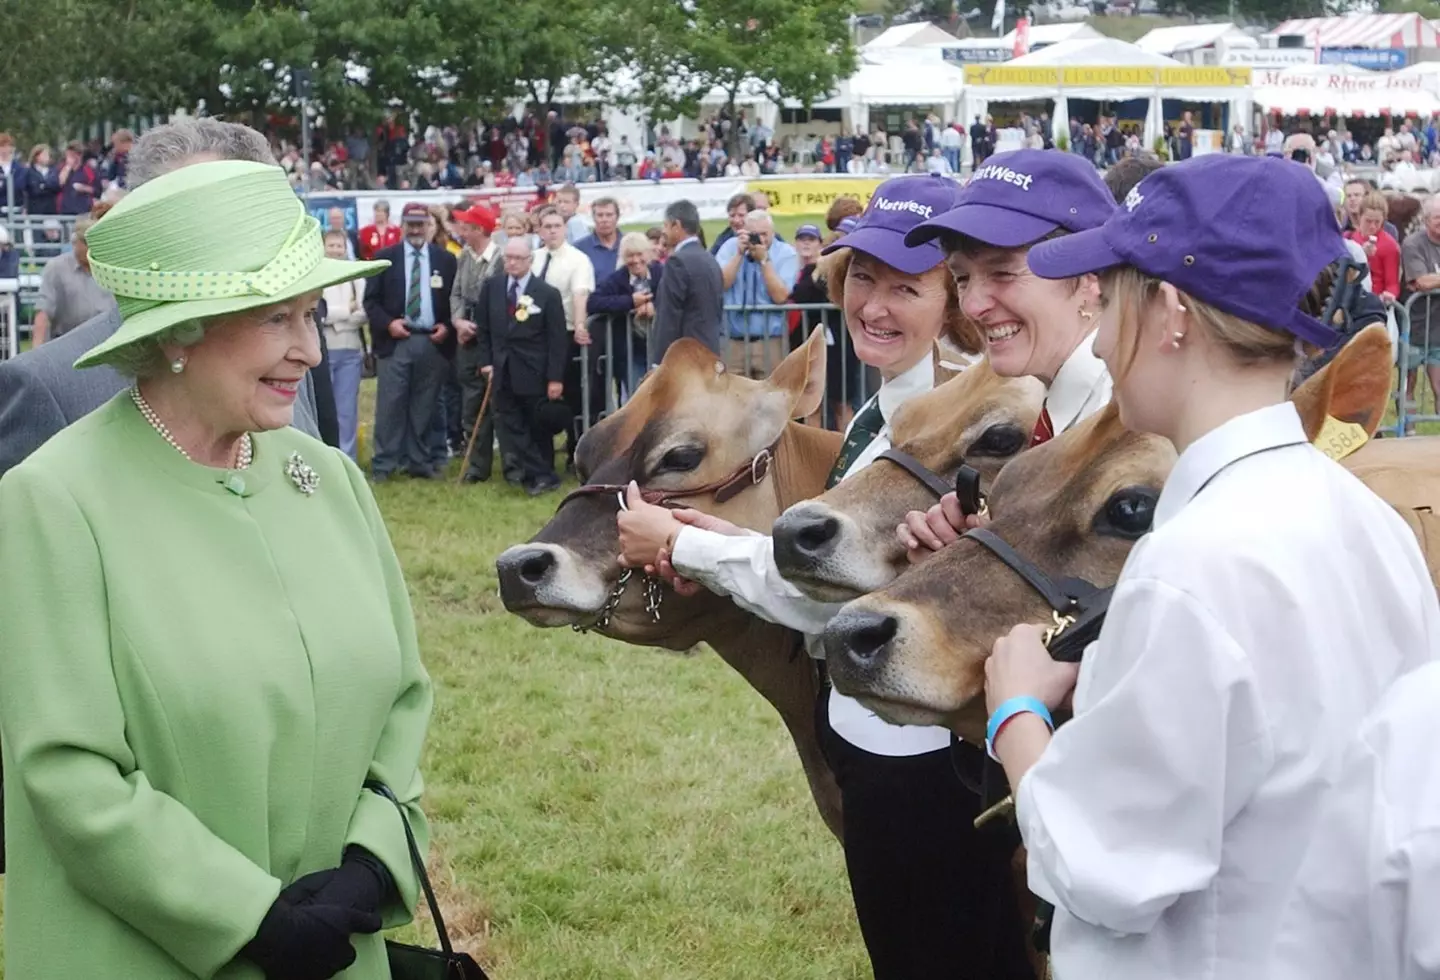 Here's the Queen, admiring more cows.